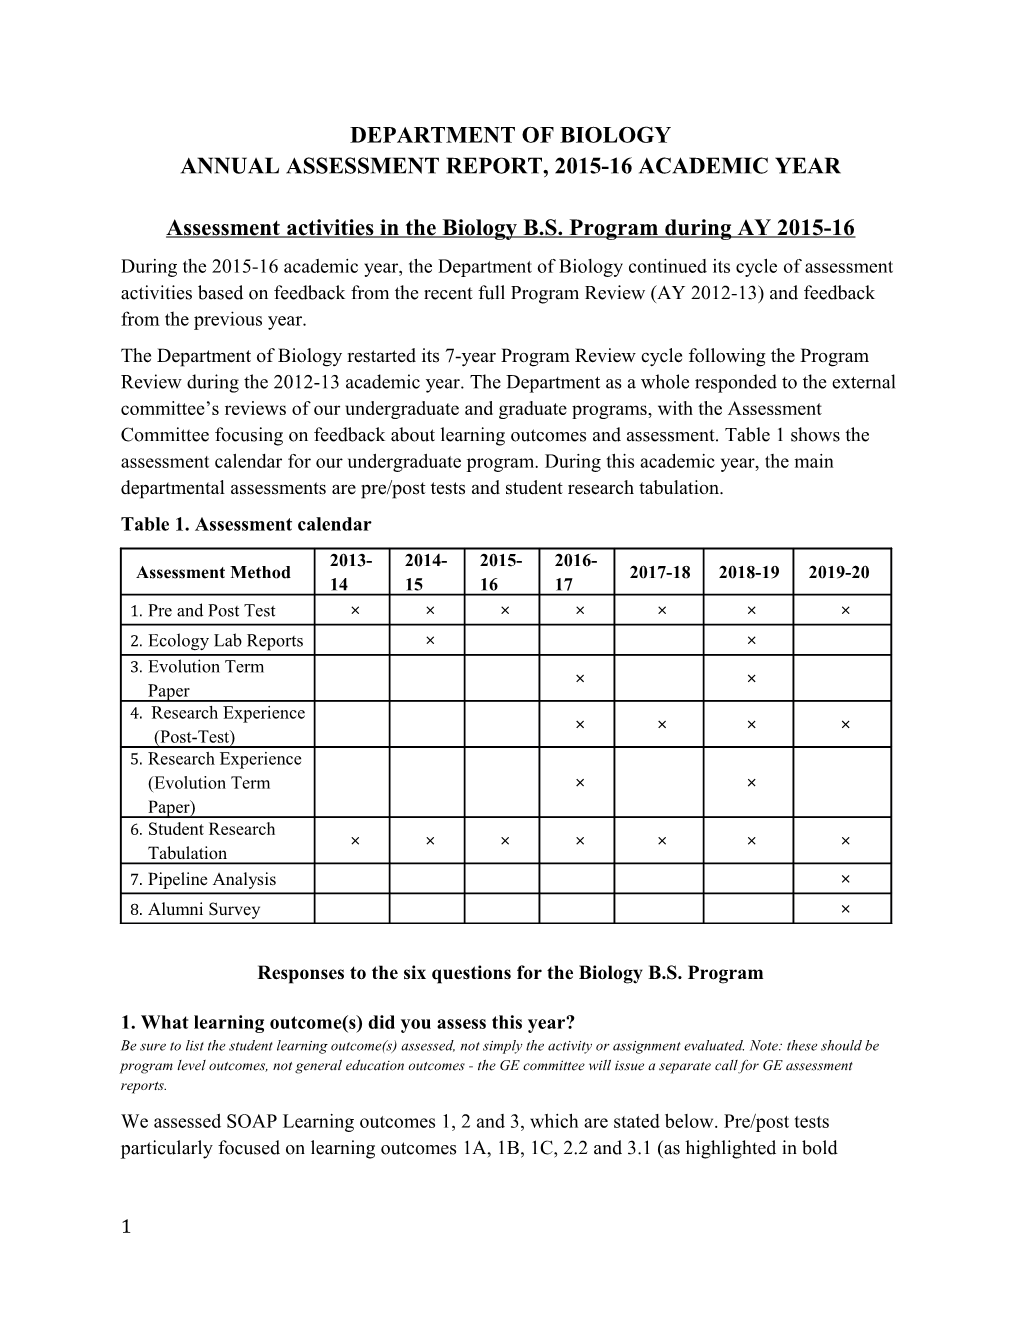 Annual Assessment Report, 2015-16 Academic Year